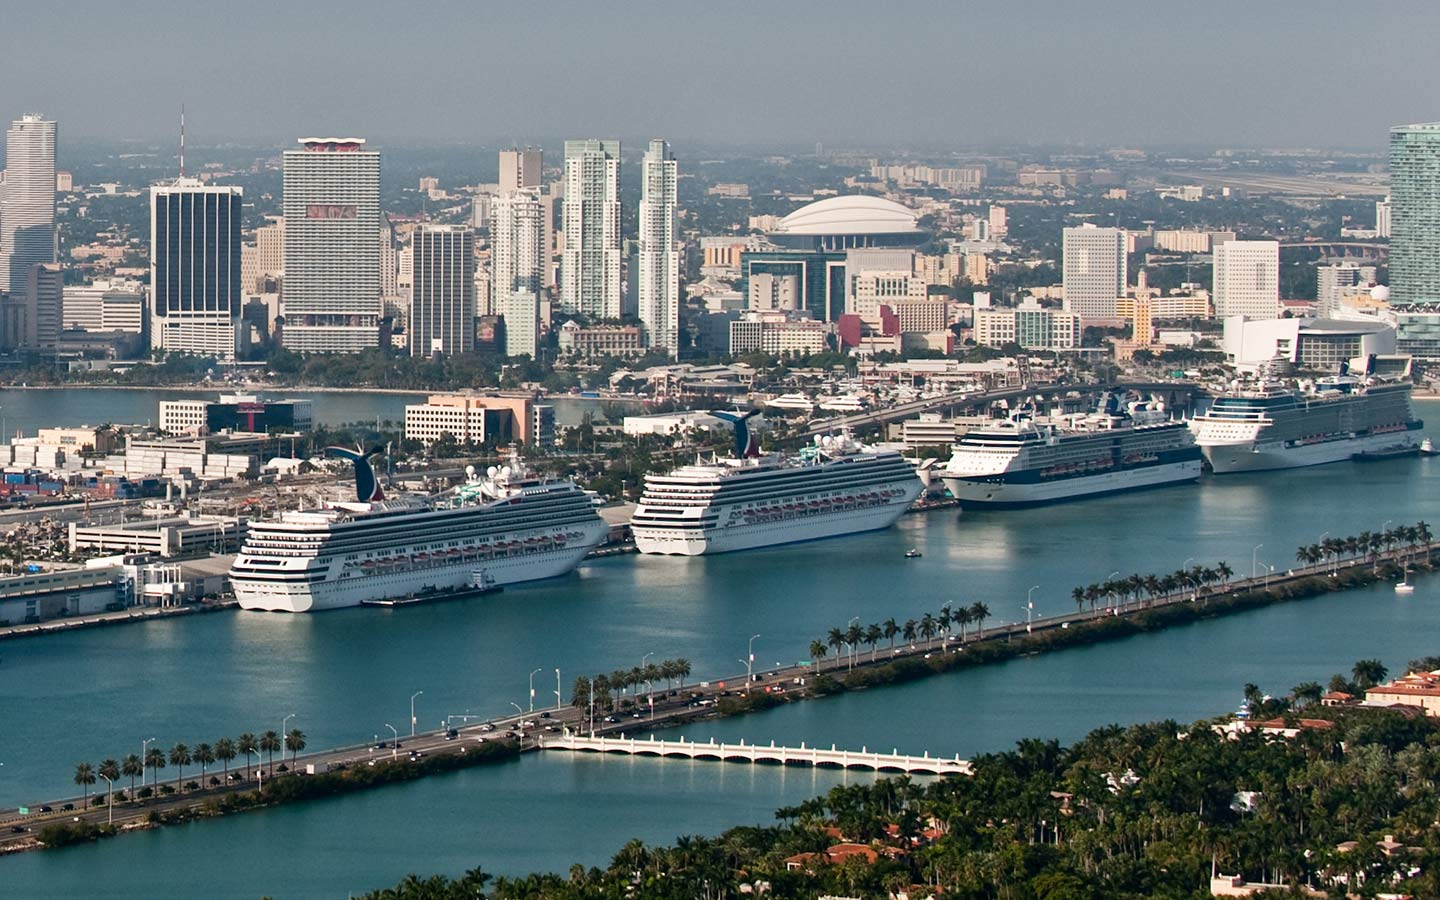 Cruise ships docked at PortMiami with Downtown Miami skyline in background